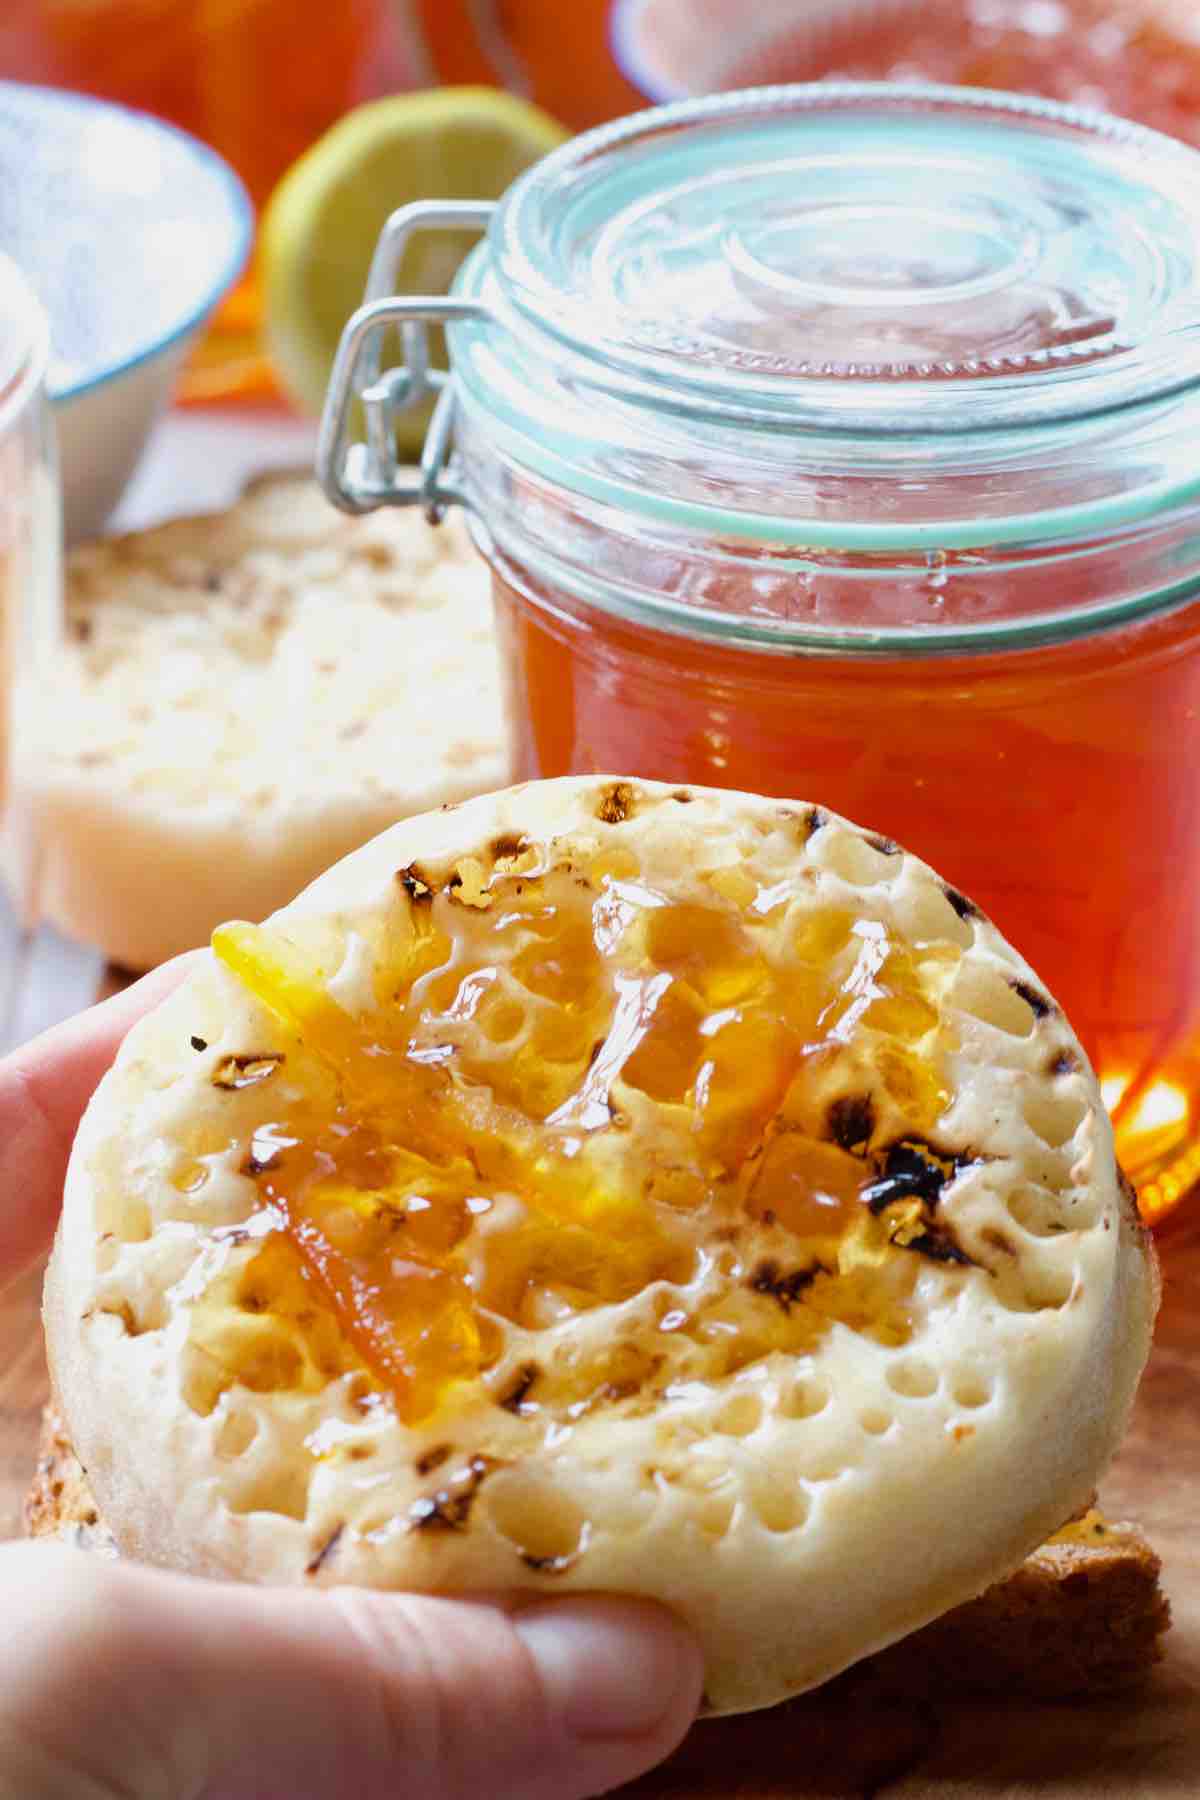 Crumpet with marmalade.